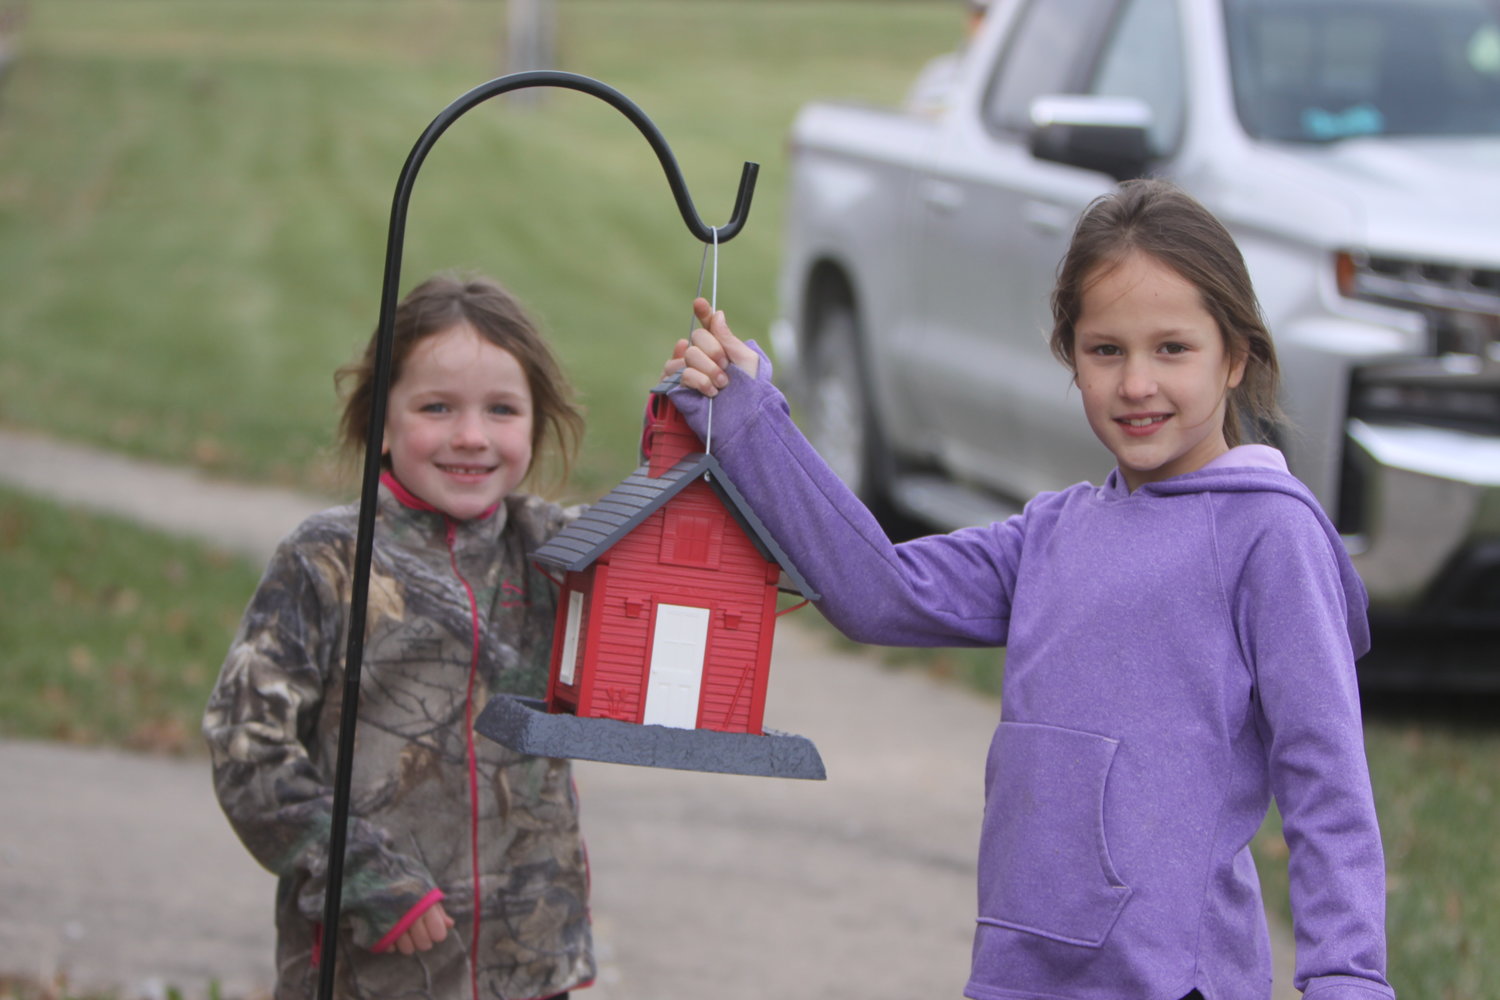 Sisters Lila and Quinn Cope pose with a bird feeder at St. Andrew’s in New Florence on Nov. 14. A total of 19 bird feeders were installed at the St. Andrew’s facility.